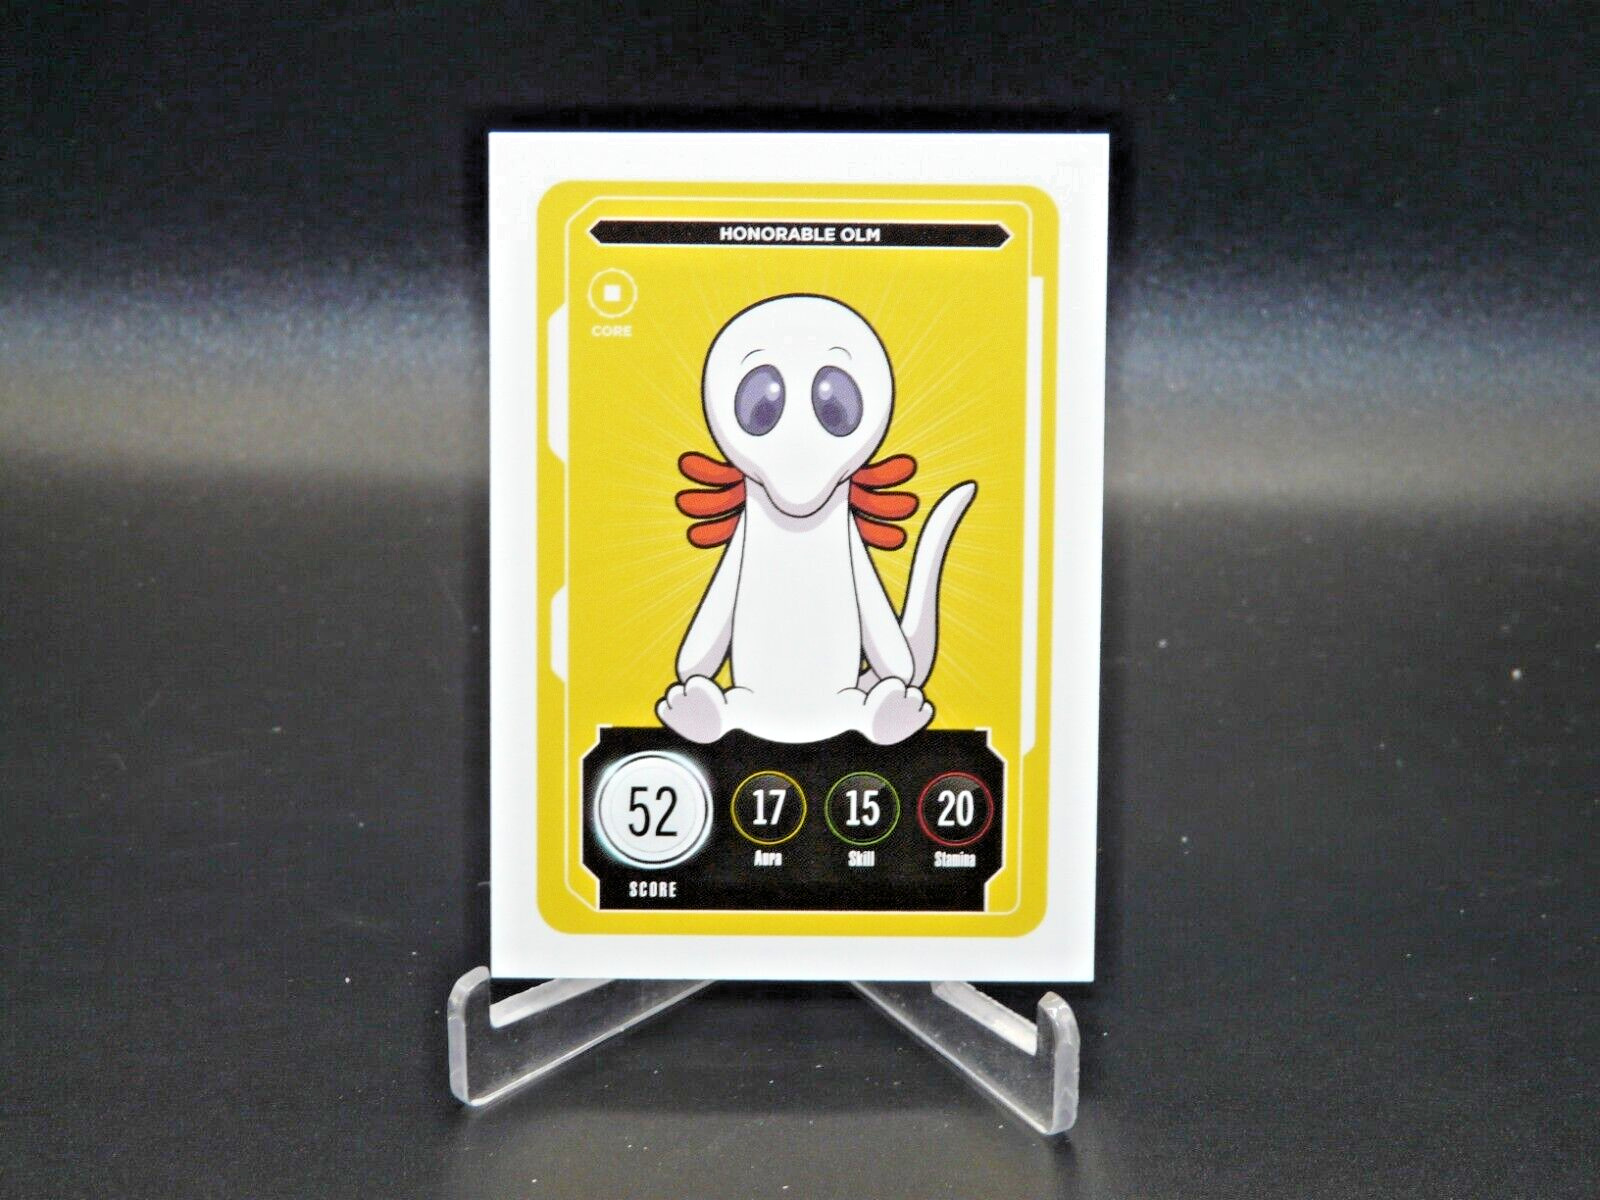 VeeFriends Series 2 Complete & Collect Trading Cards Zerocool - Honorable Olm